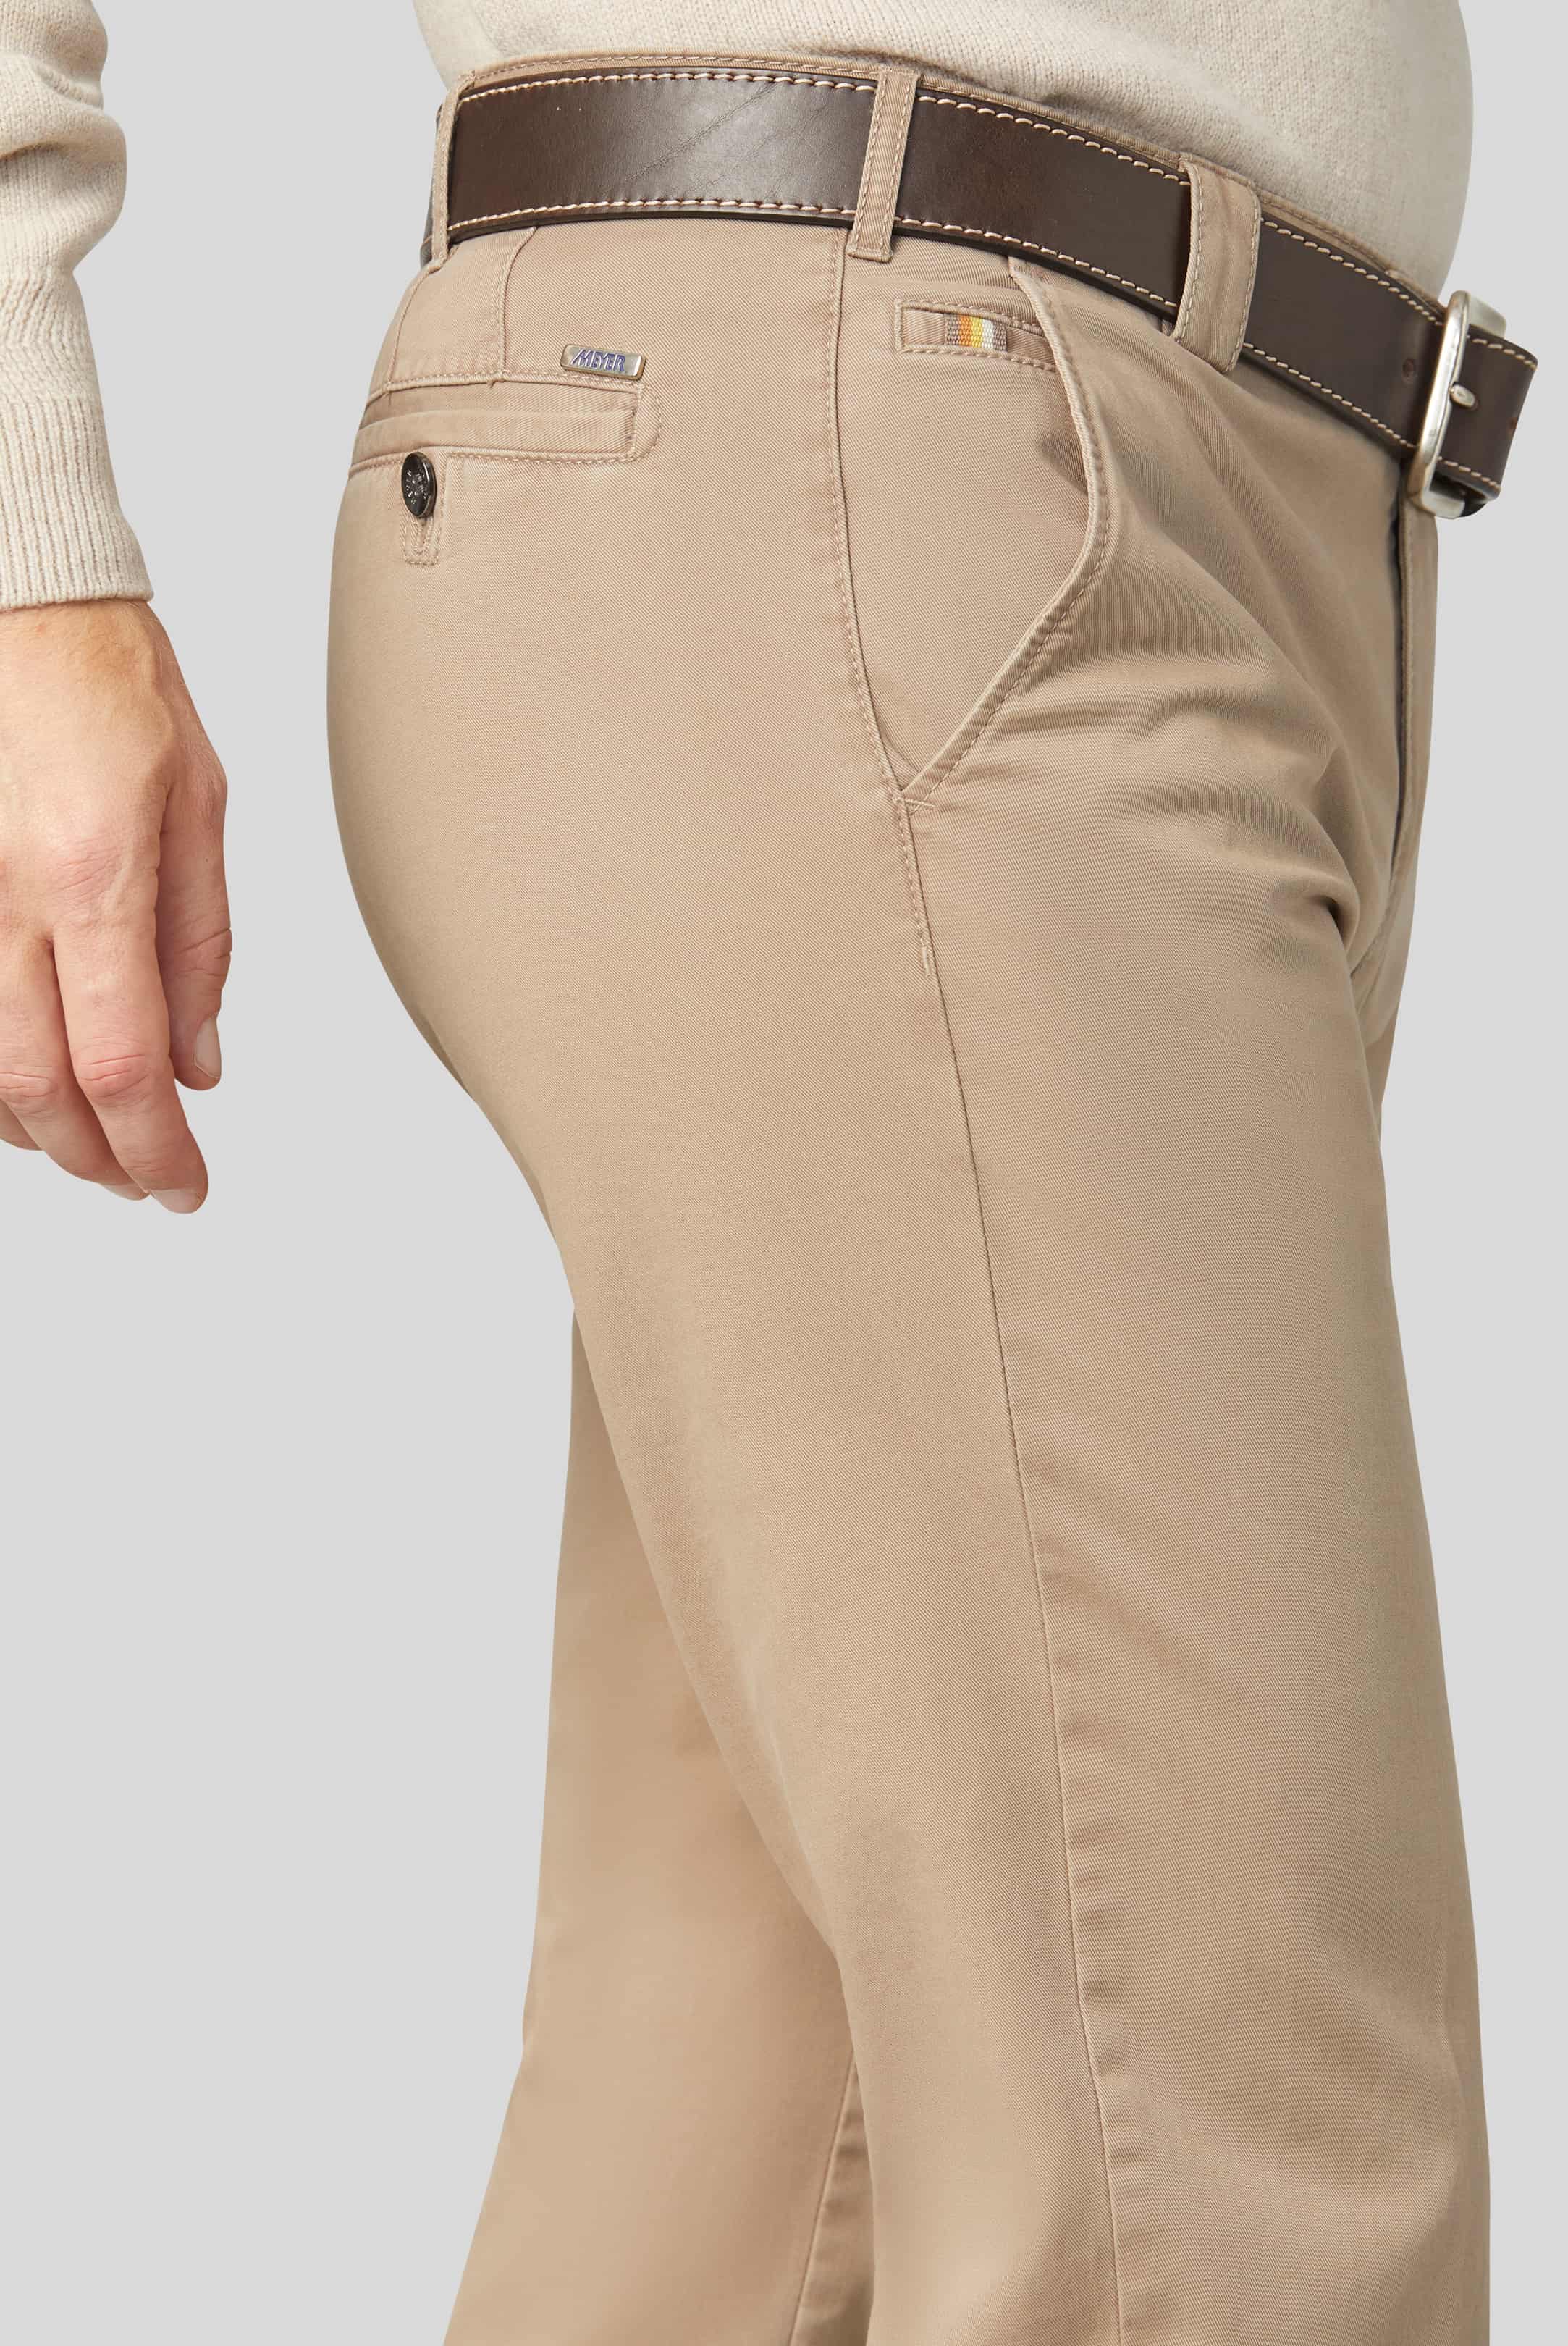 MEYER Trousers - Roma 316 Luxury Cotton Chinos - Beige